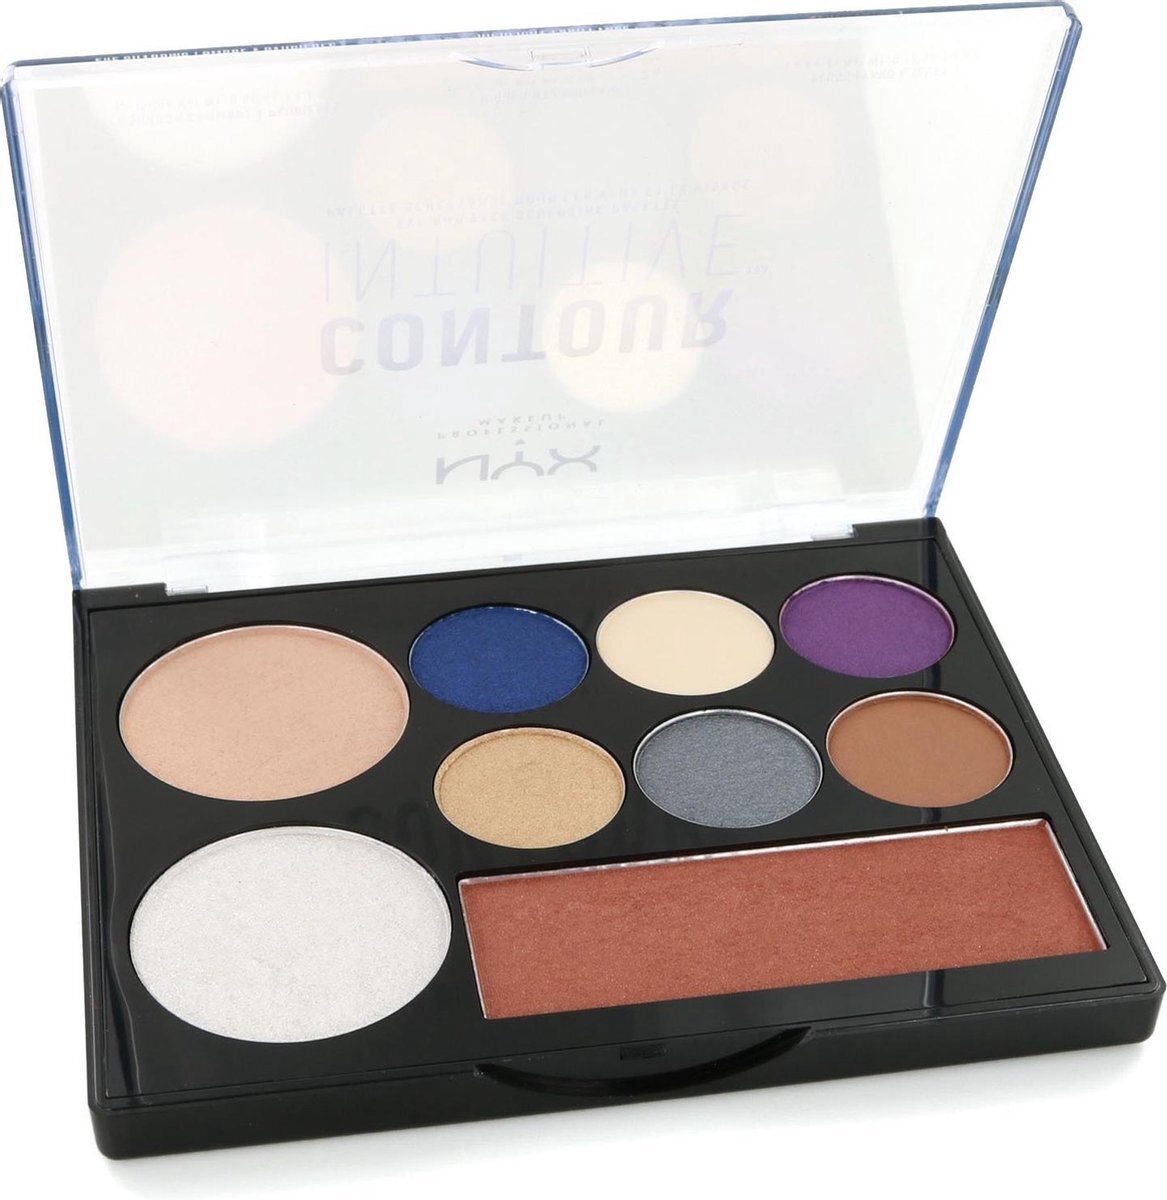 NYX Professional Makeup NYX Contour Intuitive Eye and Face Sculpting Palette - 04 Jewel Queen